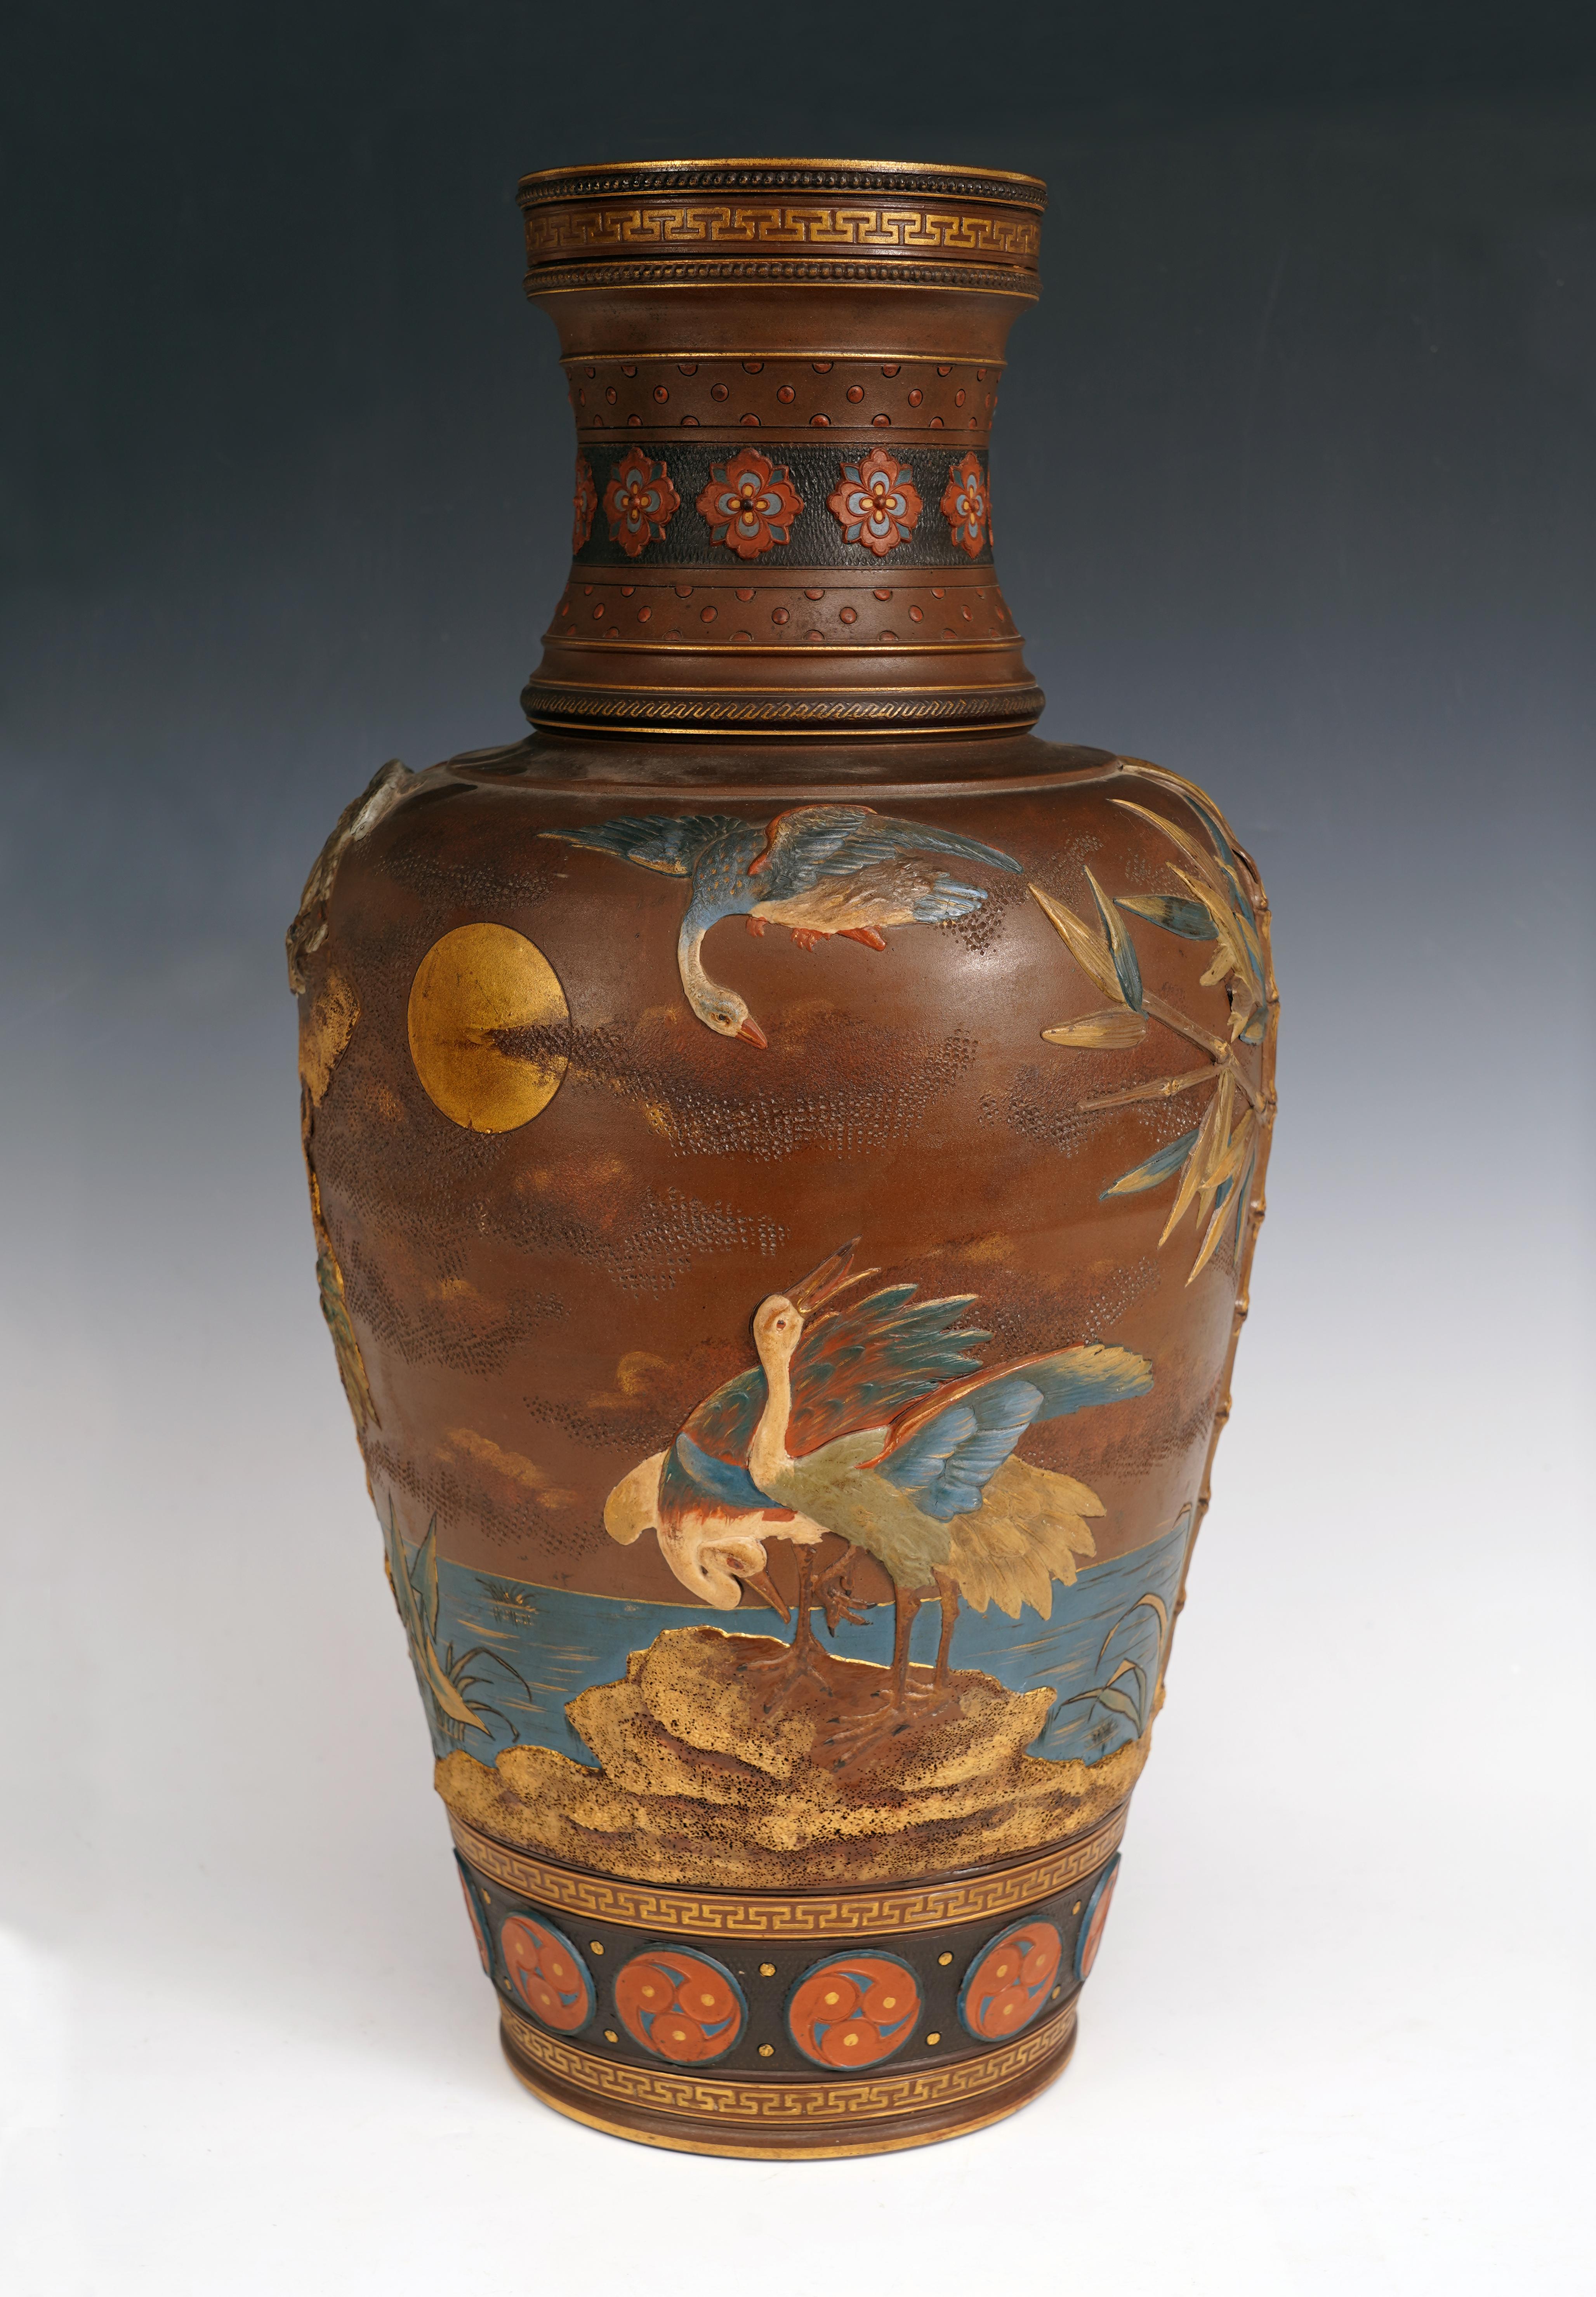 Polychromed Vase with Cranes by the Villeroy&Boch Manufacture, Mettlach Germany, Circa 1900 For Sale